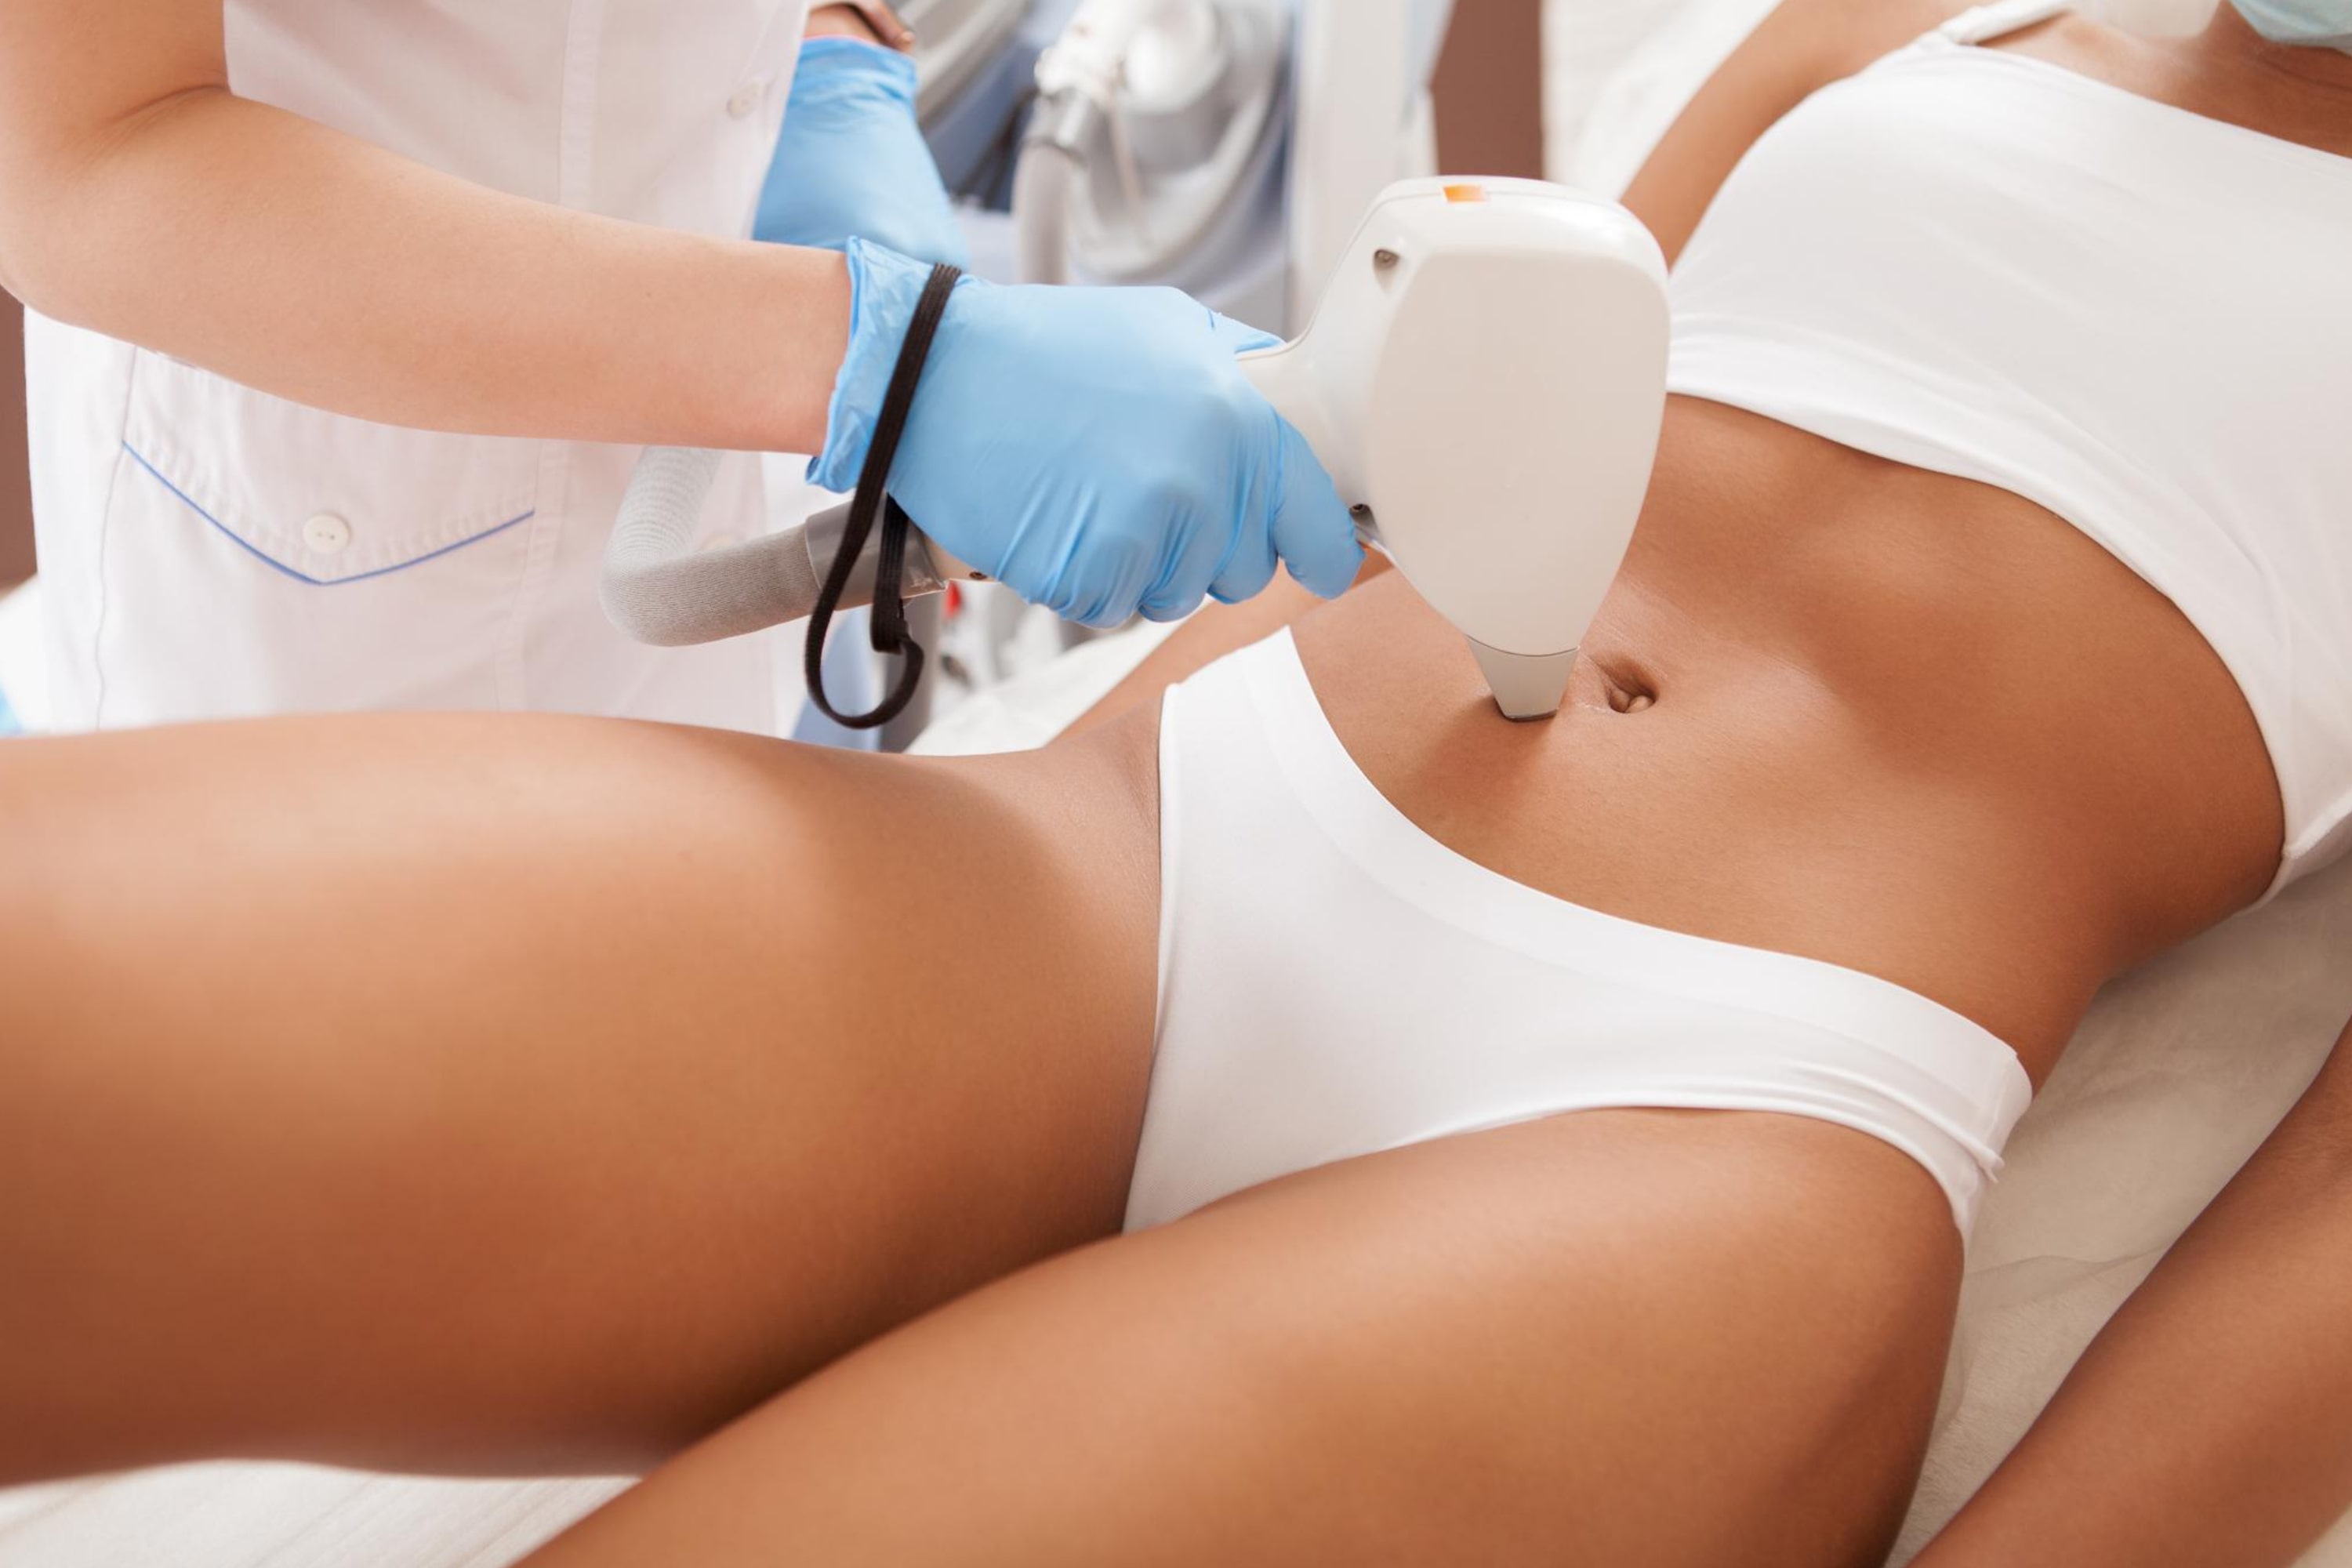 How Much Does a Small Area Cost For Laser Hair Removal